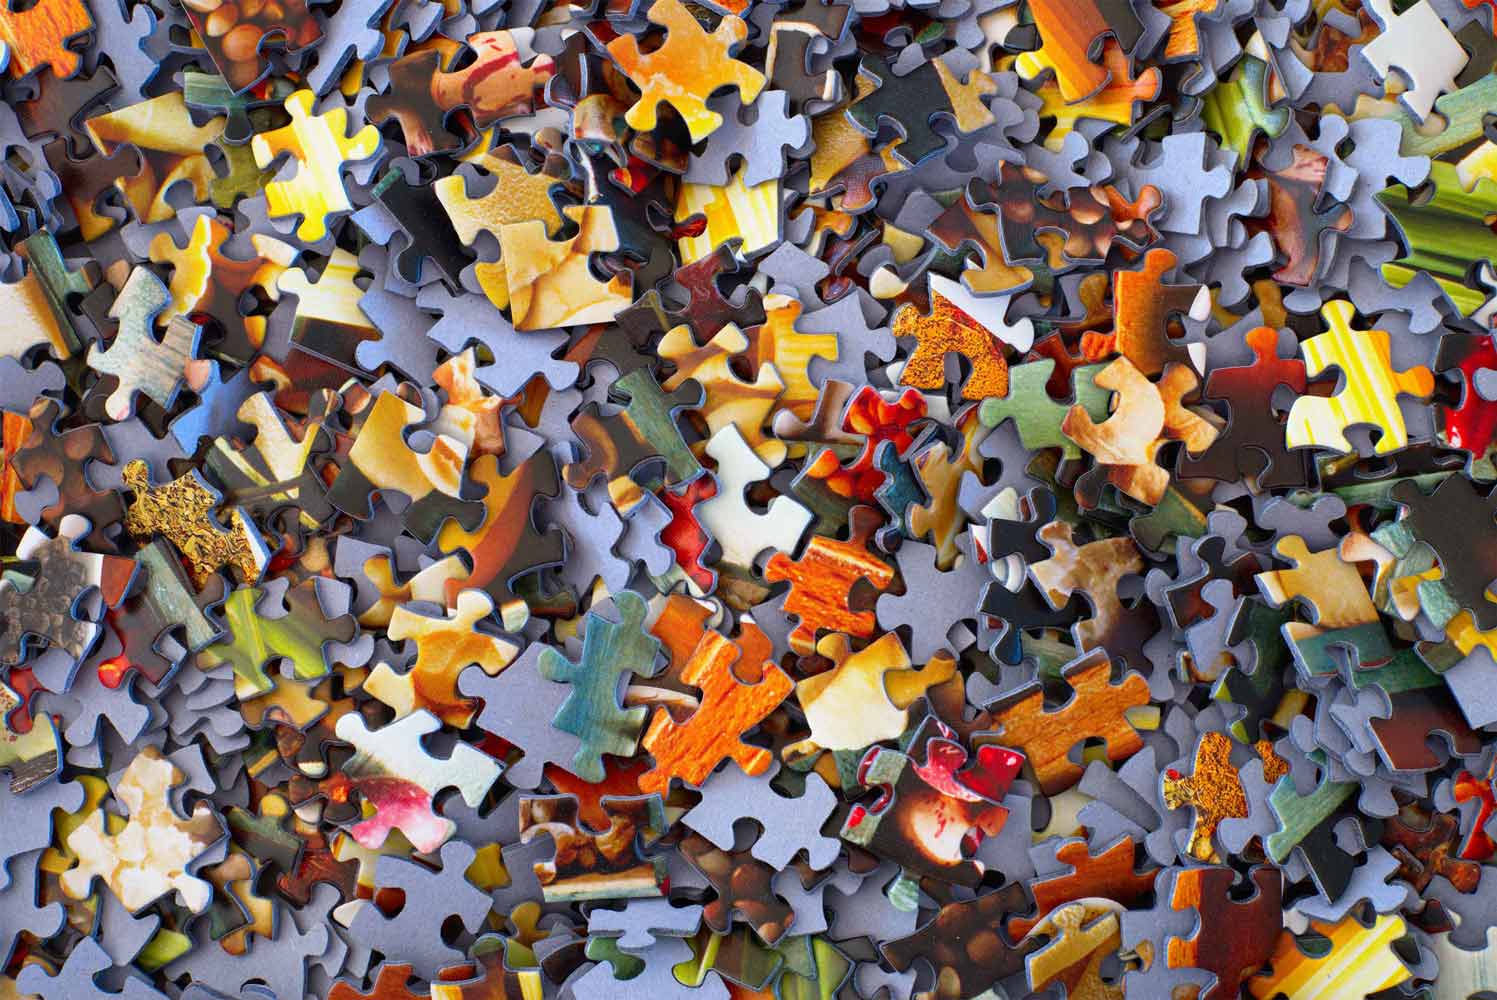 puzzles pieces all over a table